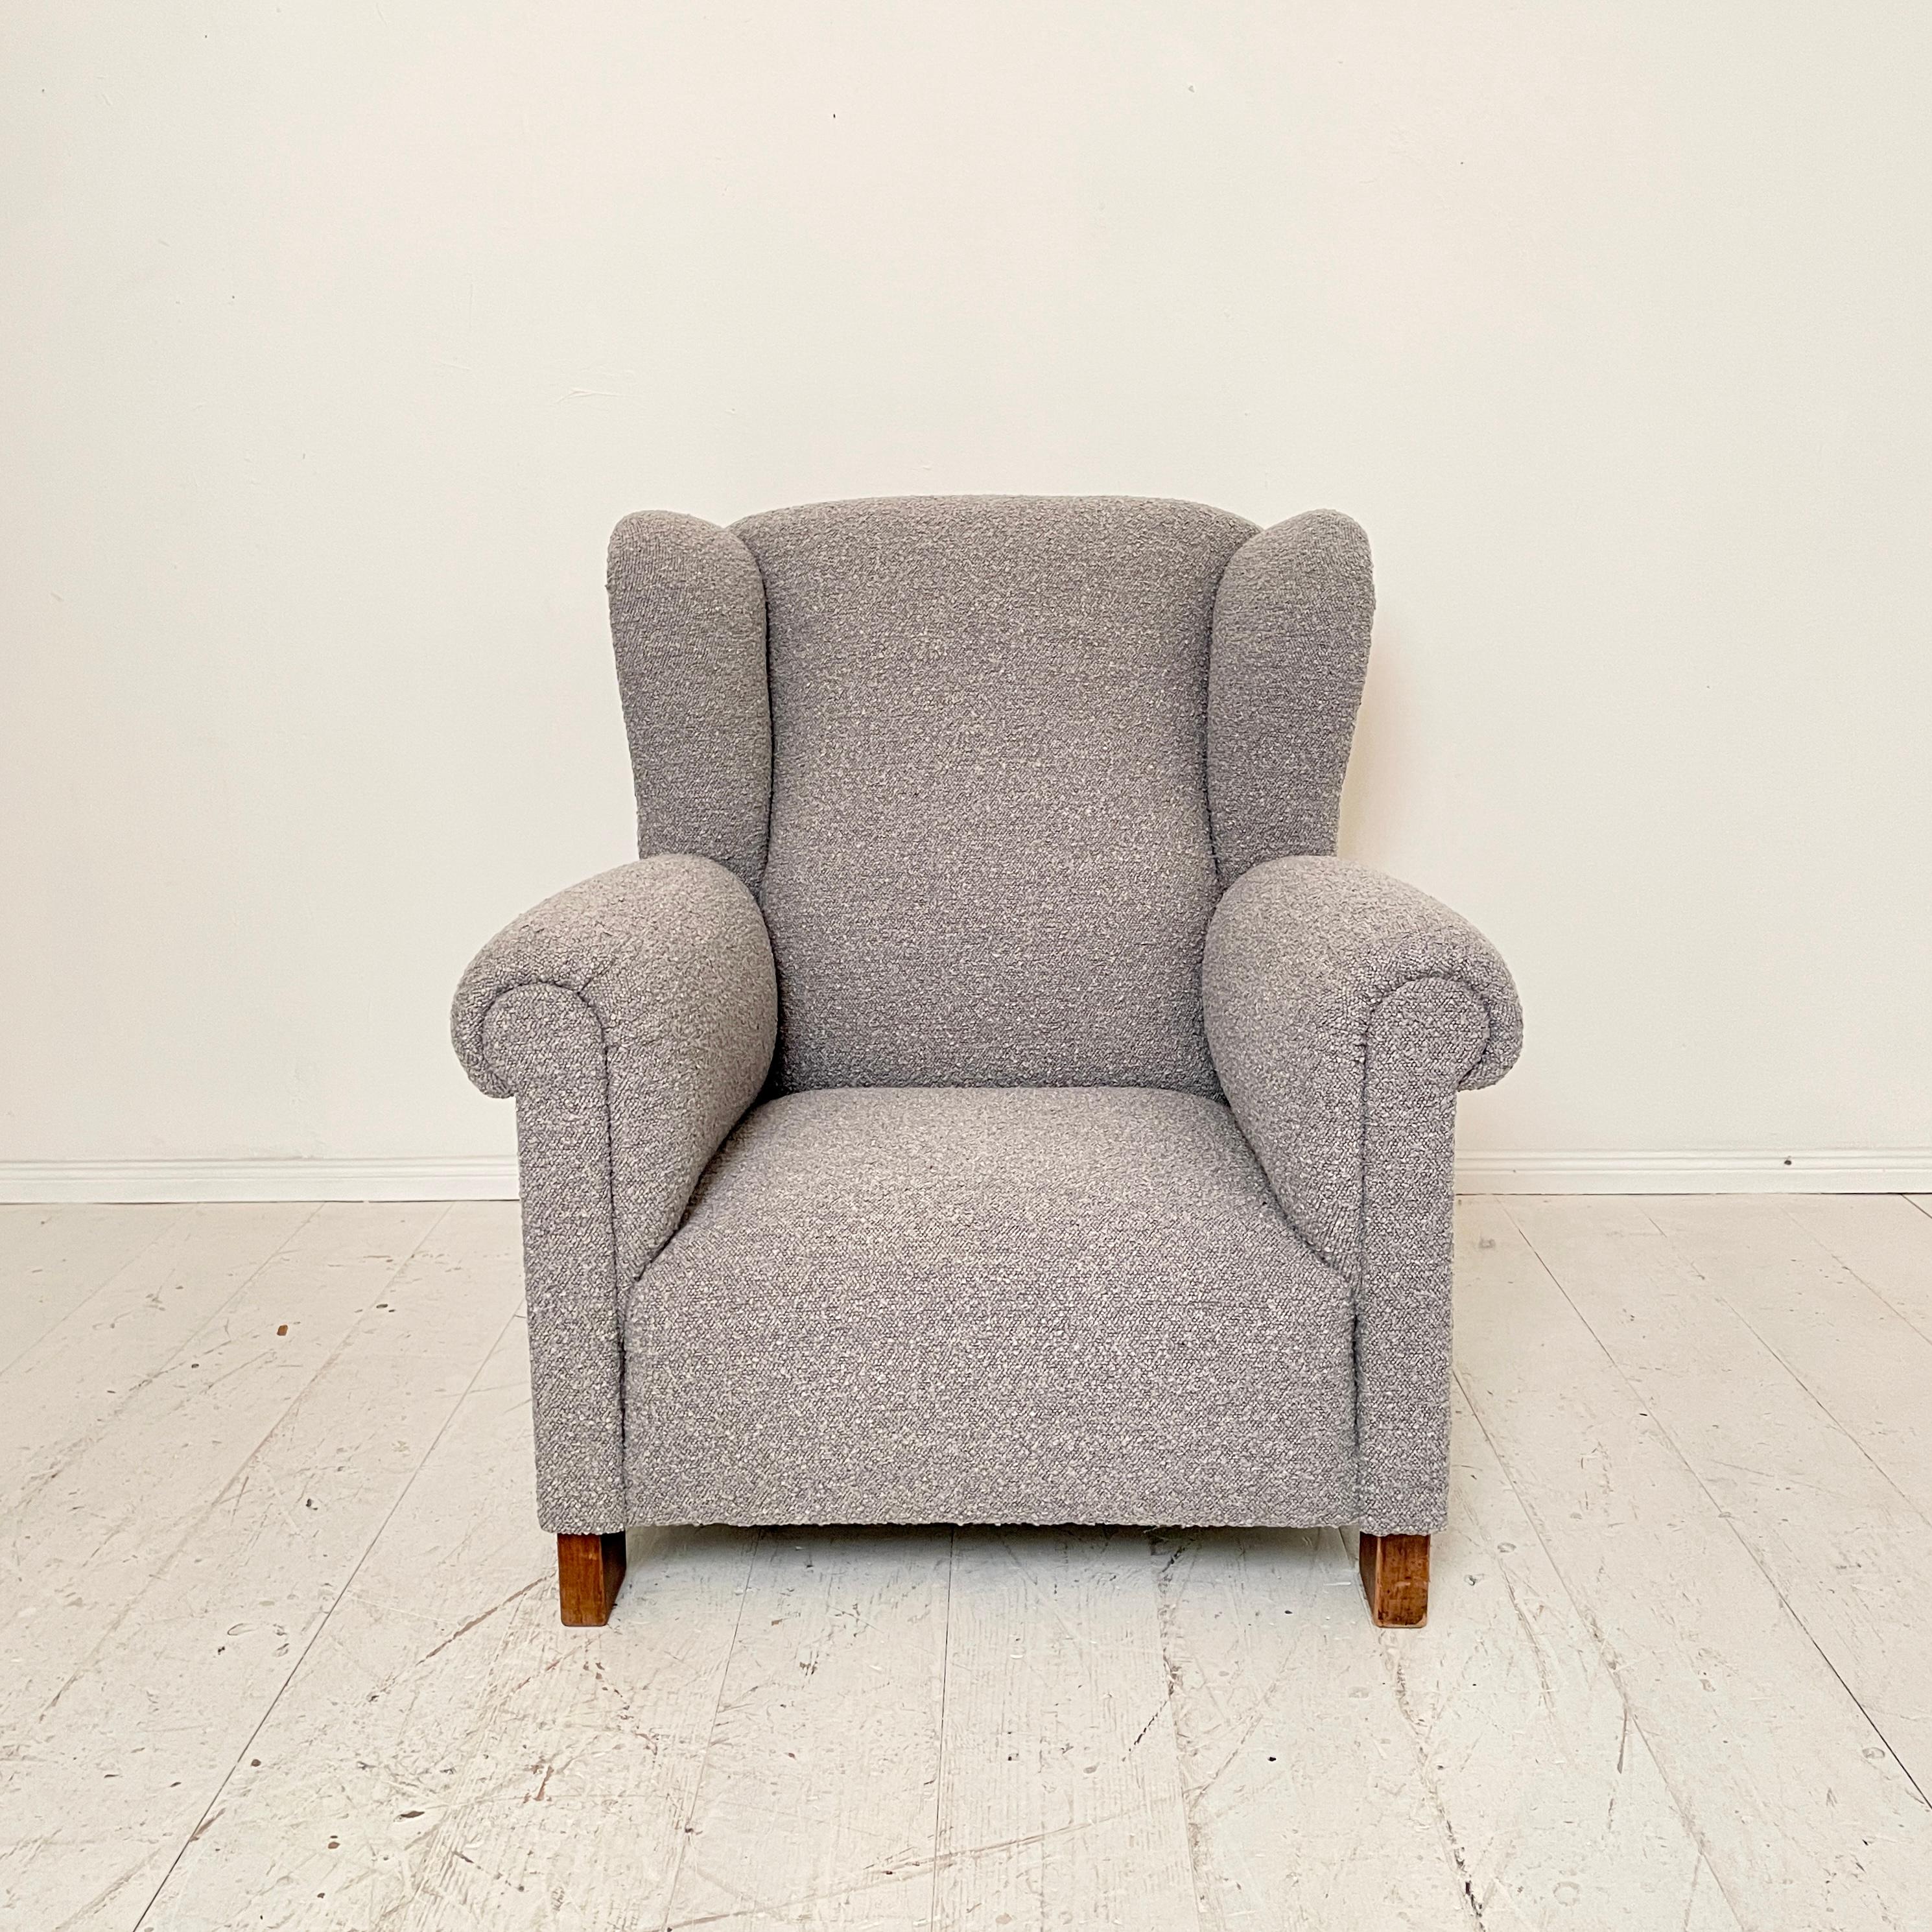 German Art Deco Wingback Chair in Gray Boucle Fabric, 1925 In Good Condition For Sale In Berlin, DE